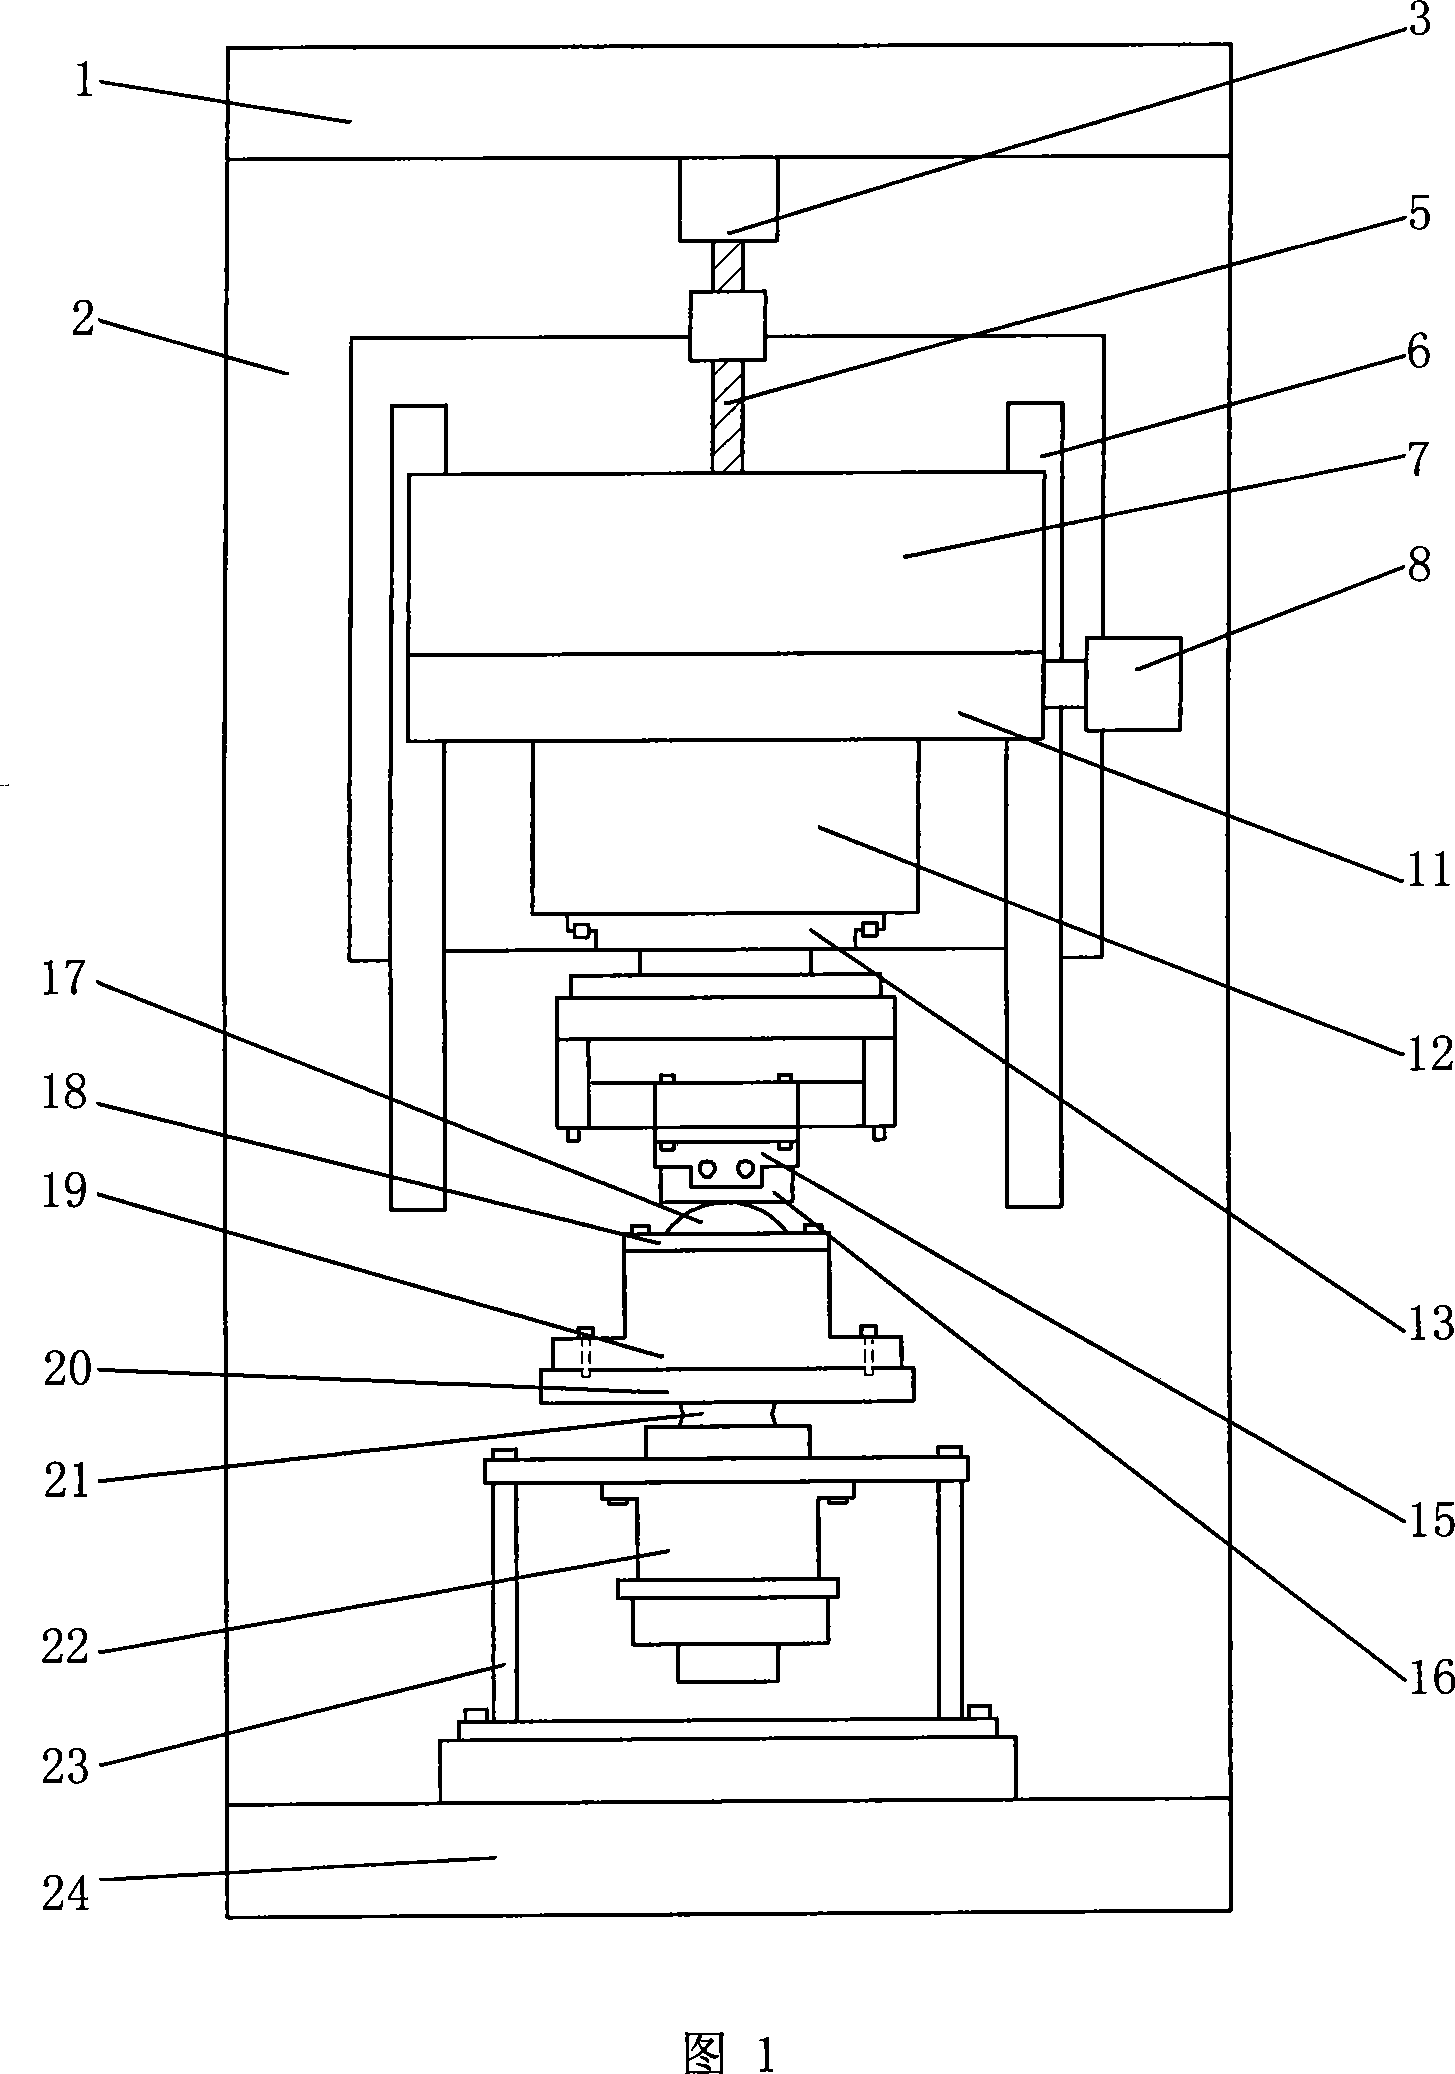 Twisting or micro-moving frictional wear test device